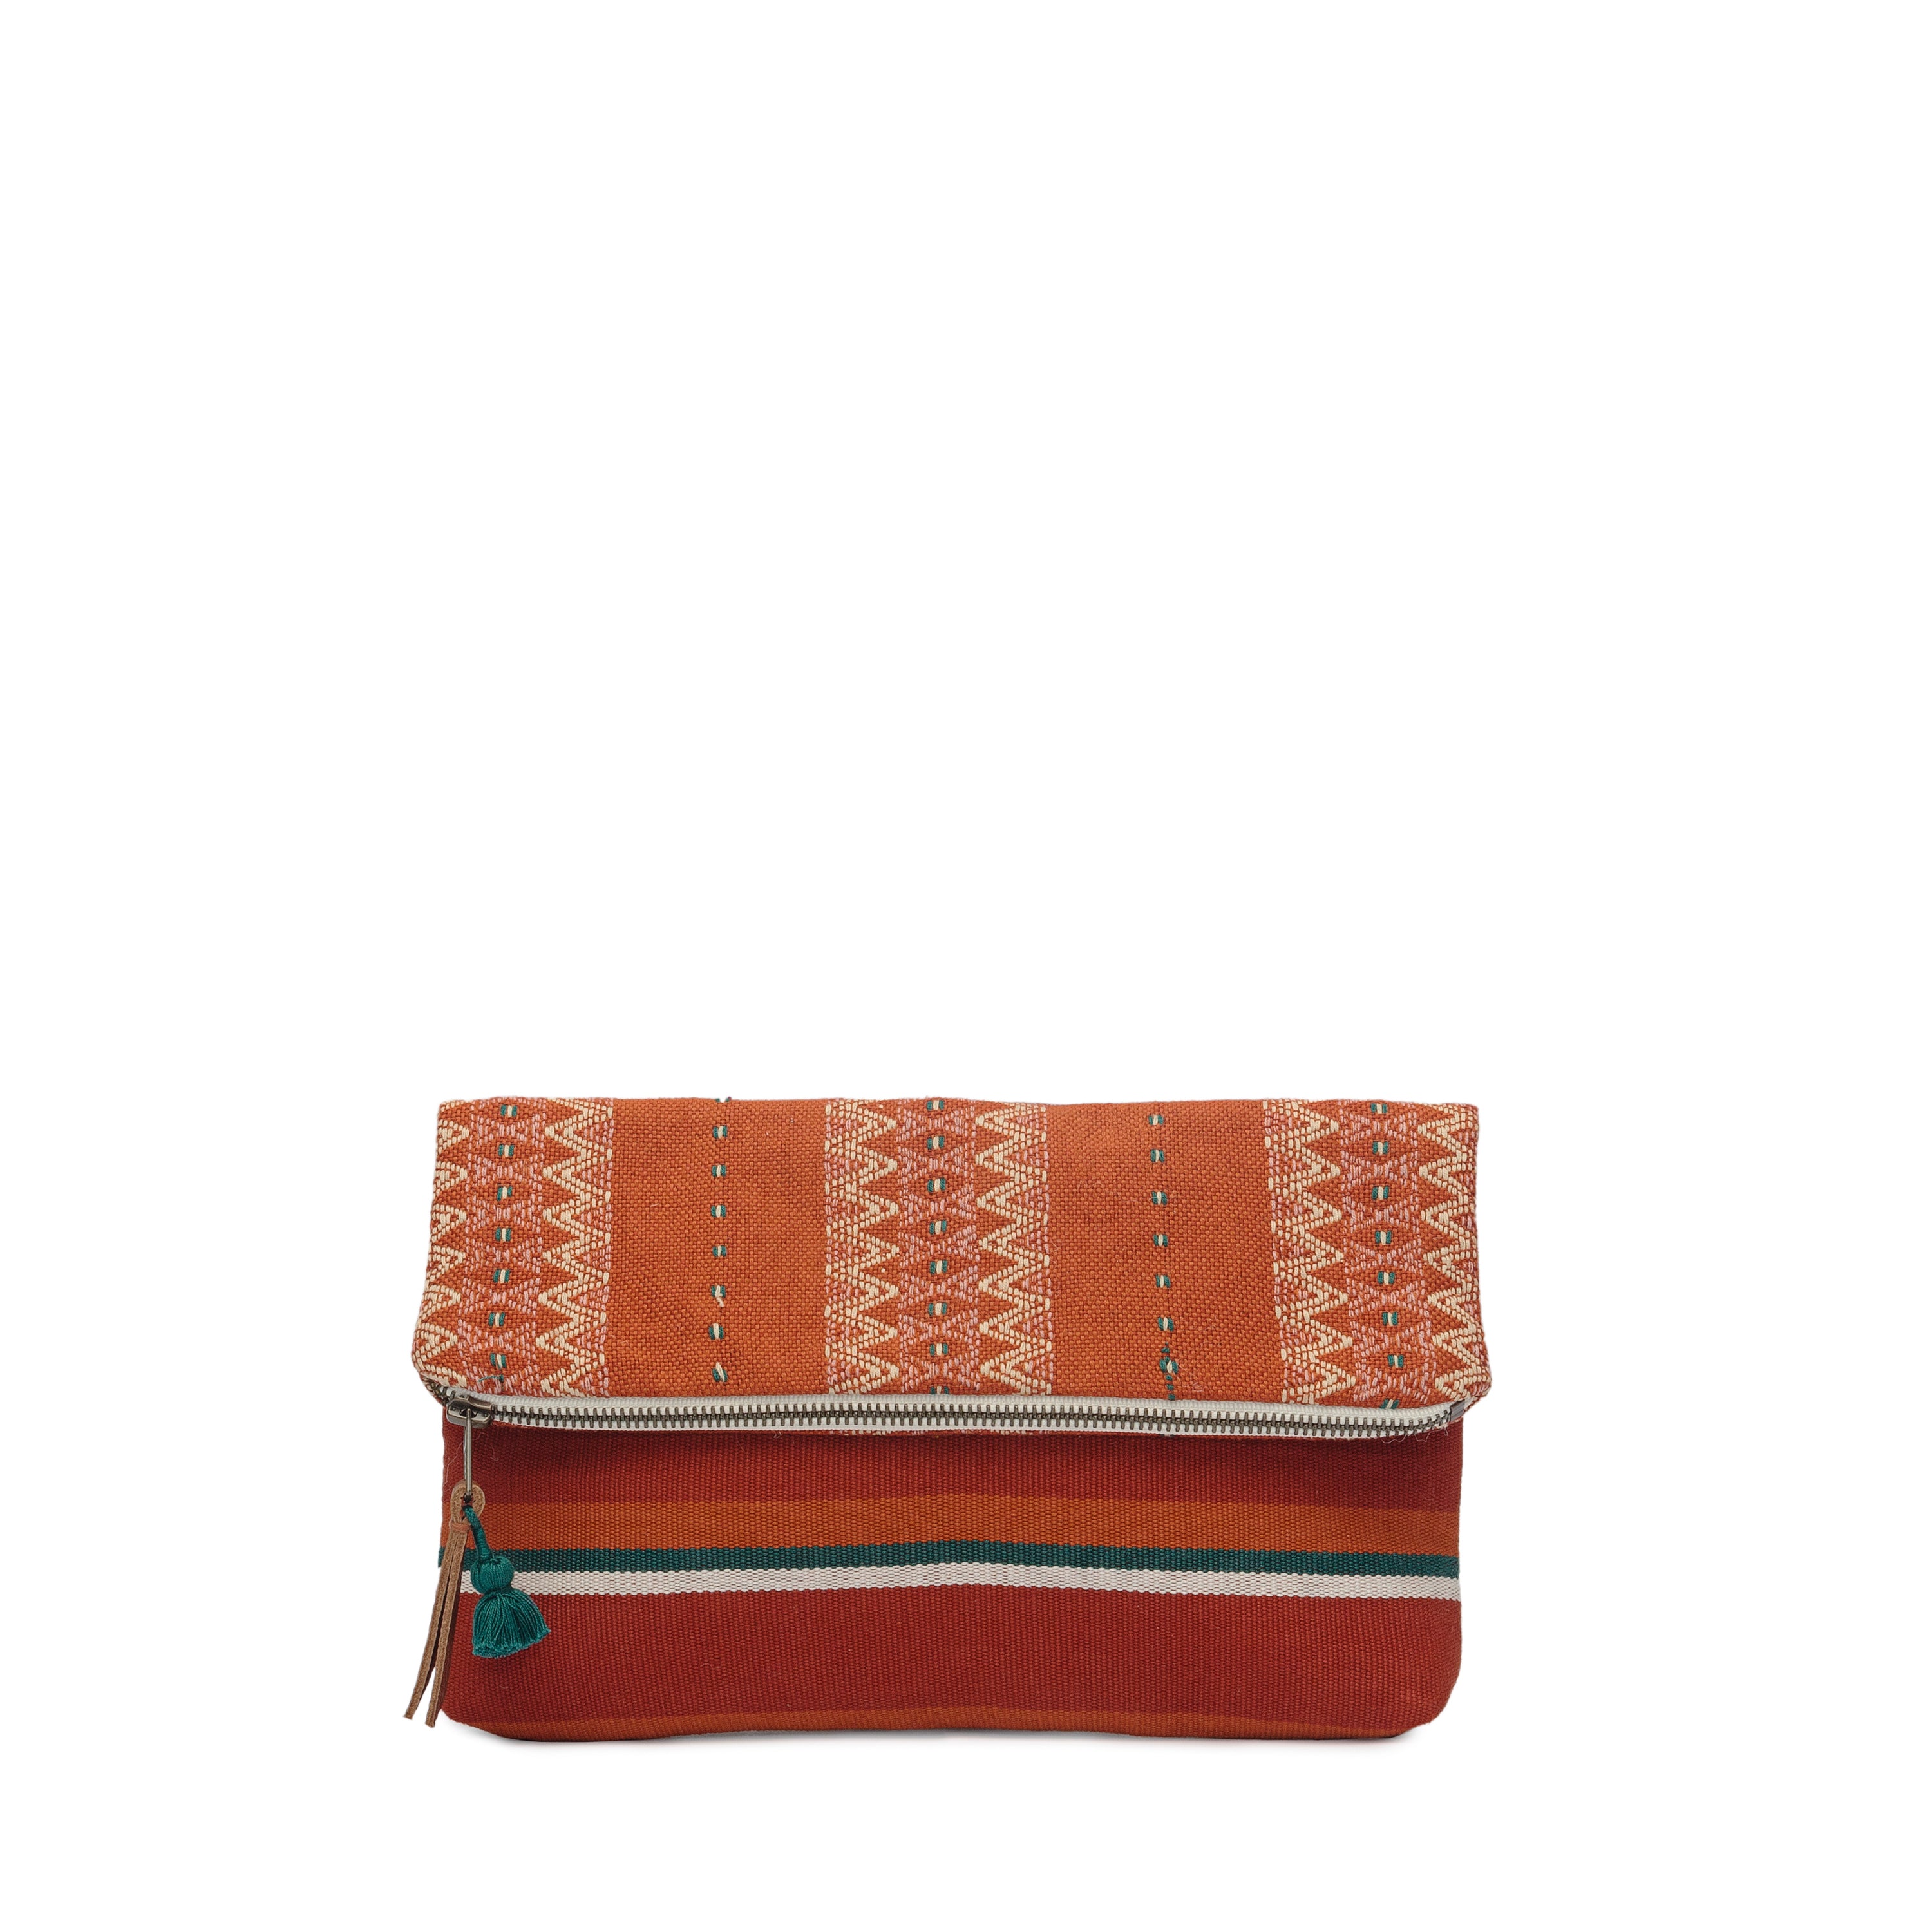 Celia Artisan Handwoven Ginger Clutch. The Clutch has two patterns, one with a red and green vertical striped fabric, and the other with a zigzag yellow and orange pattern. It has a mini green tassel and a leather zipper pull.